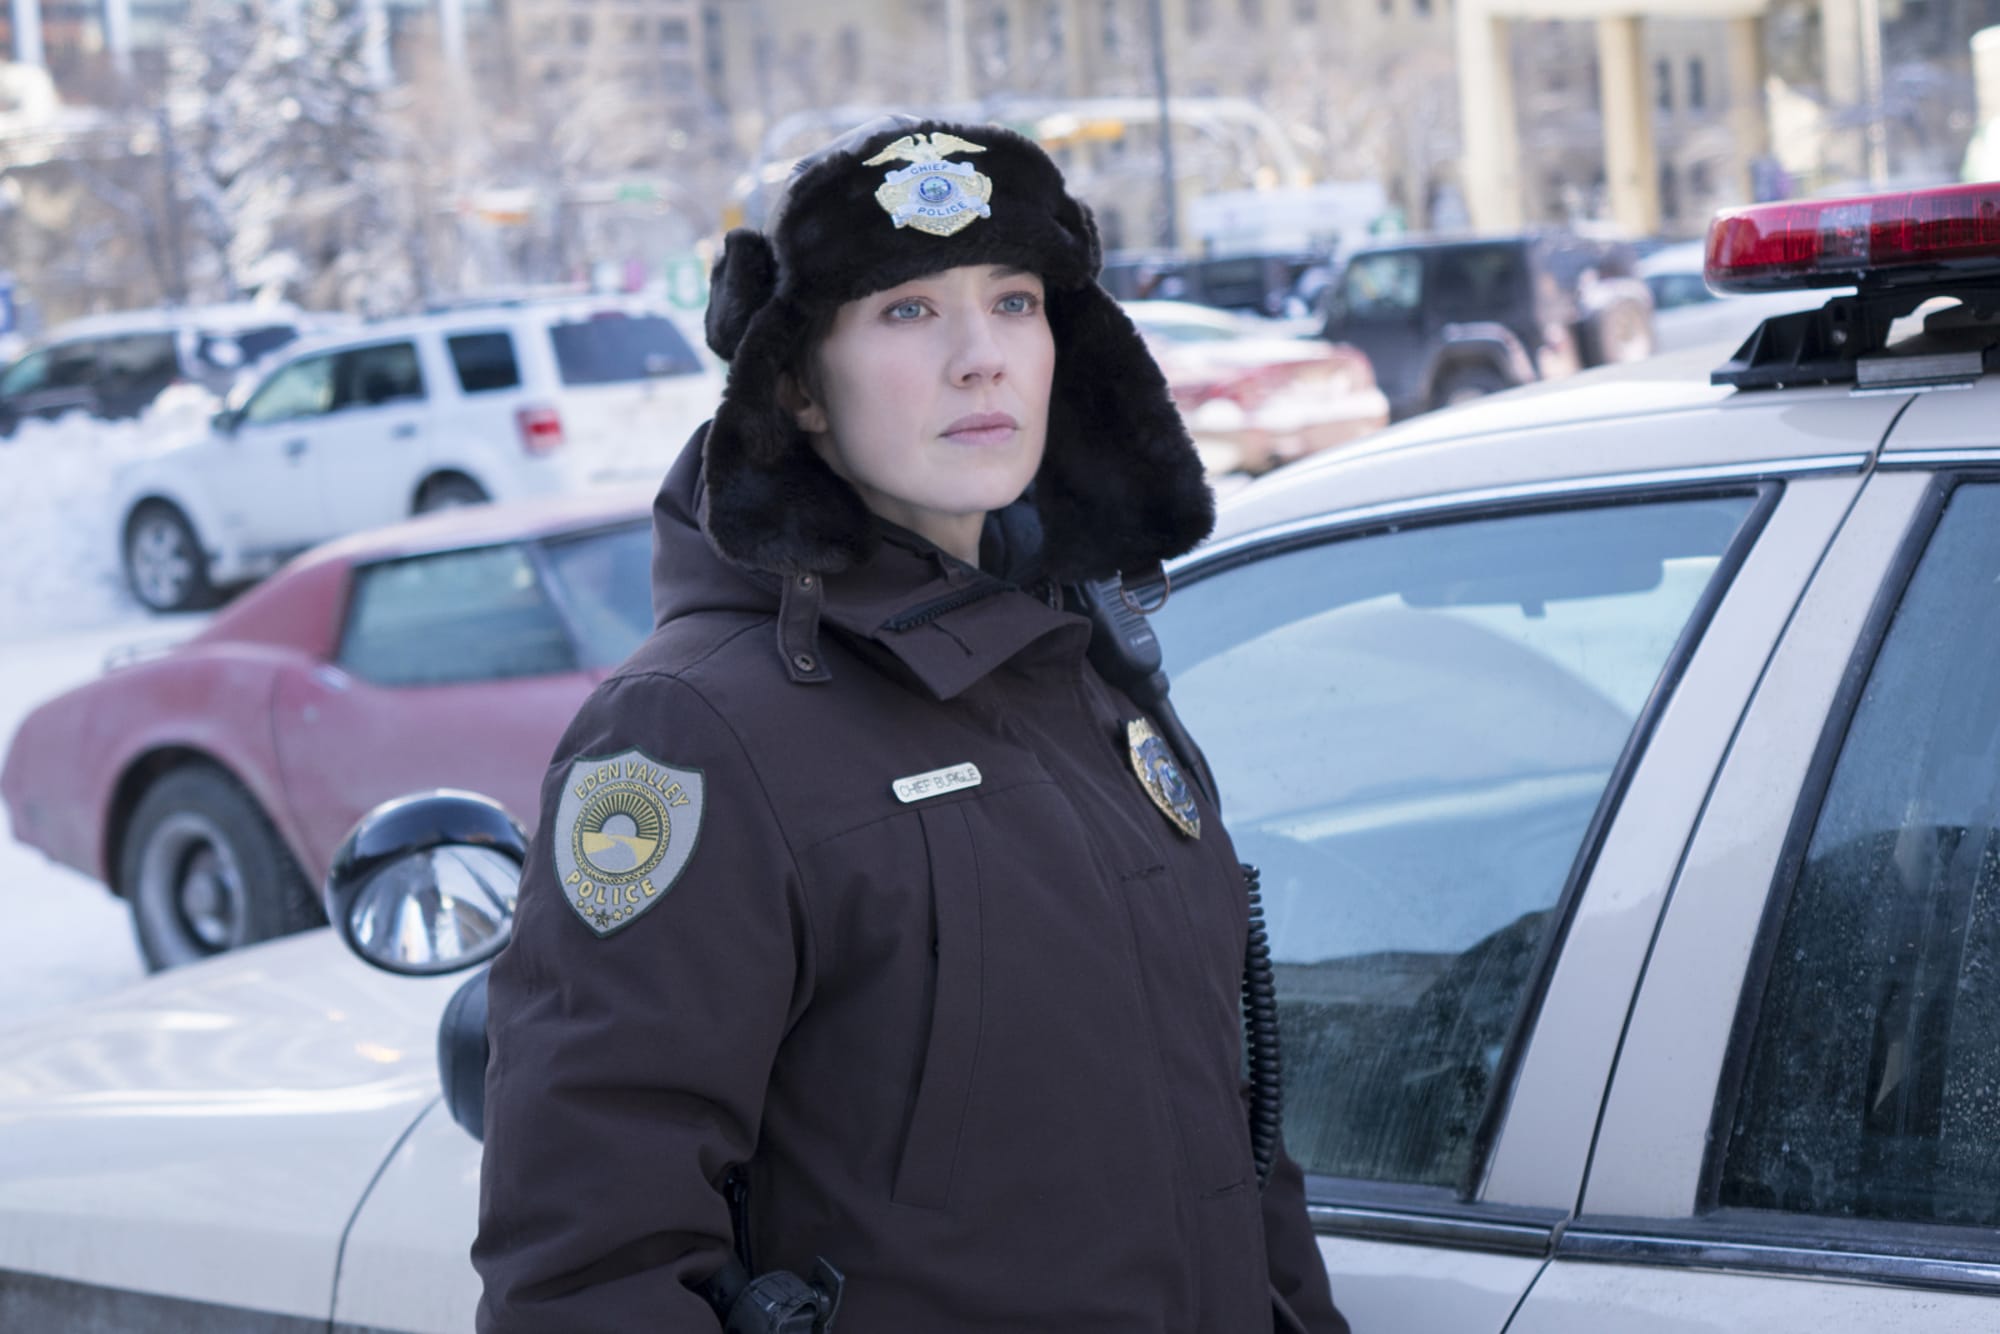 Fargo season 4 emphasizes "family is complicated" in latest trailer